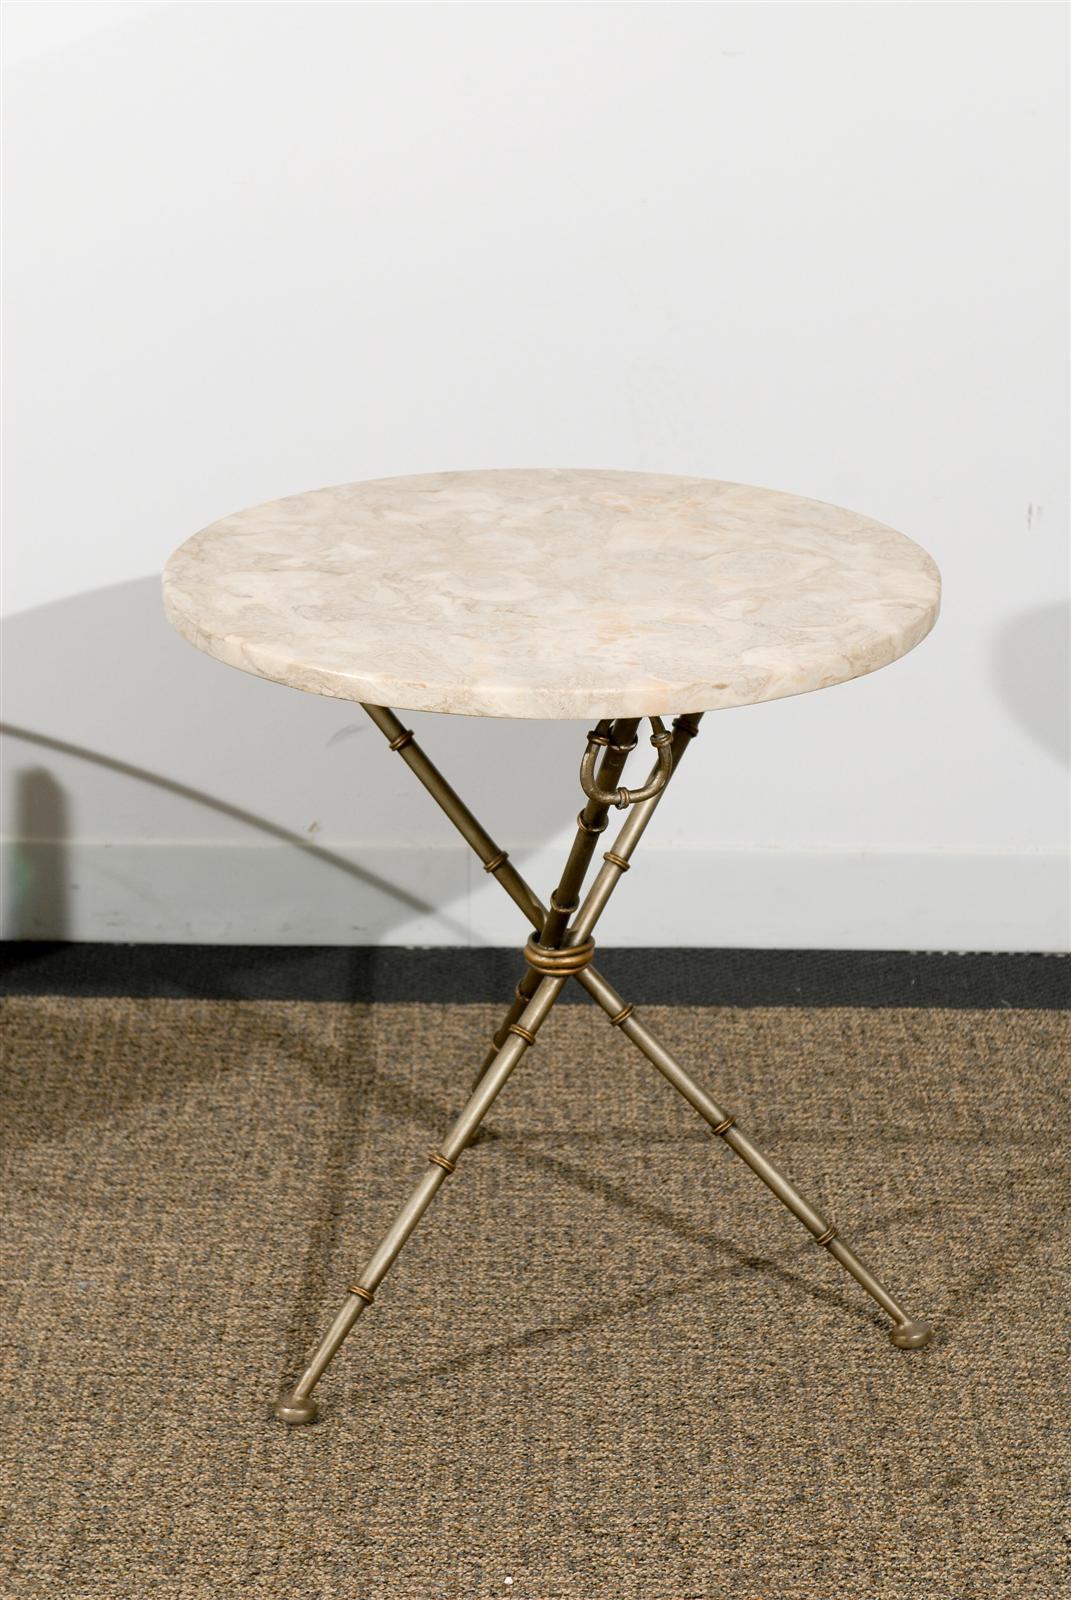 Tripod iron faux bamboo side table with creamy white marble top.
Base in burnished silver and bronze patina with loose hanging rings.